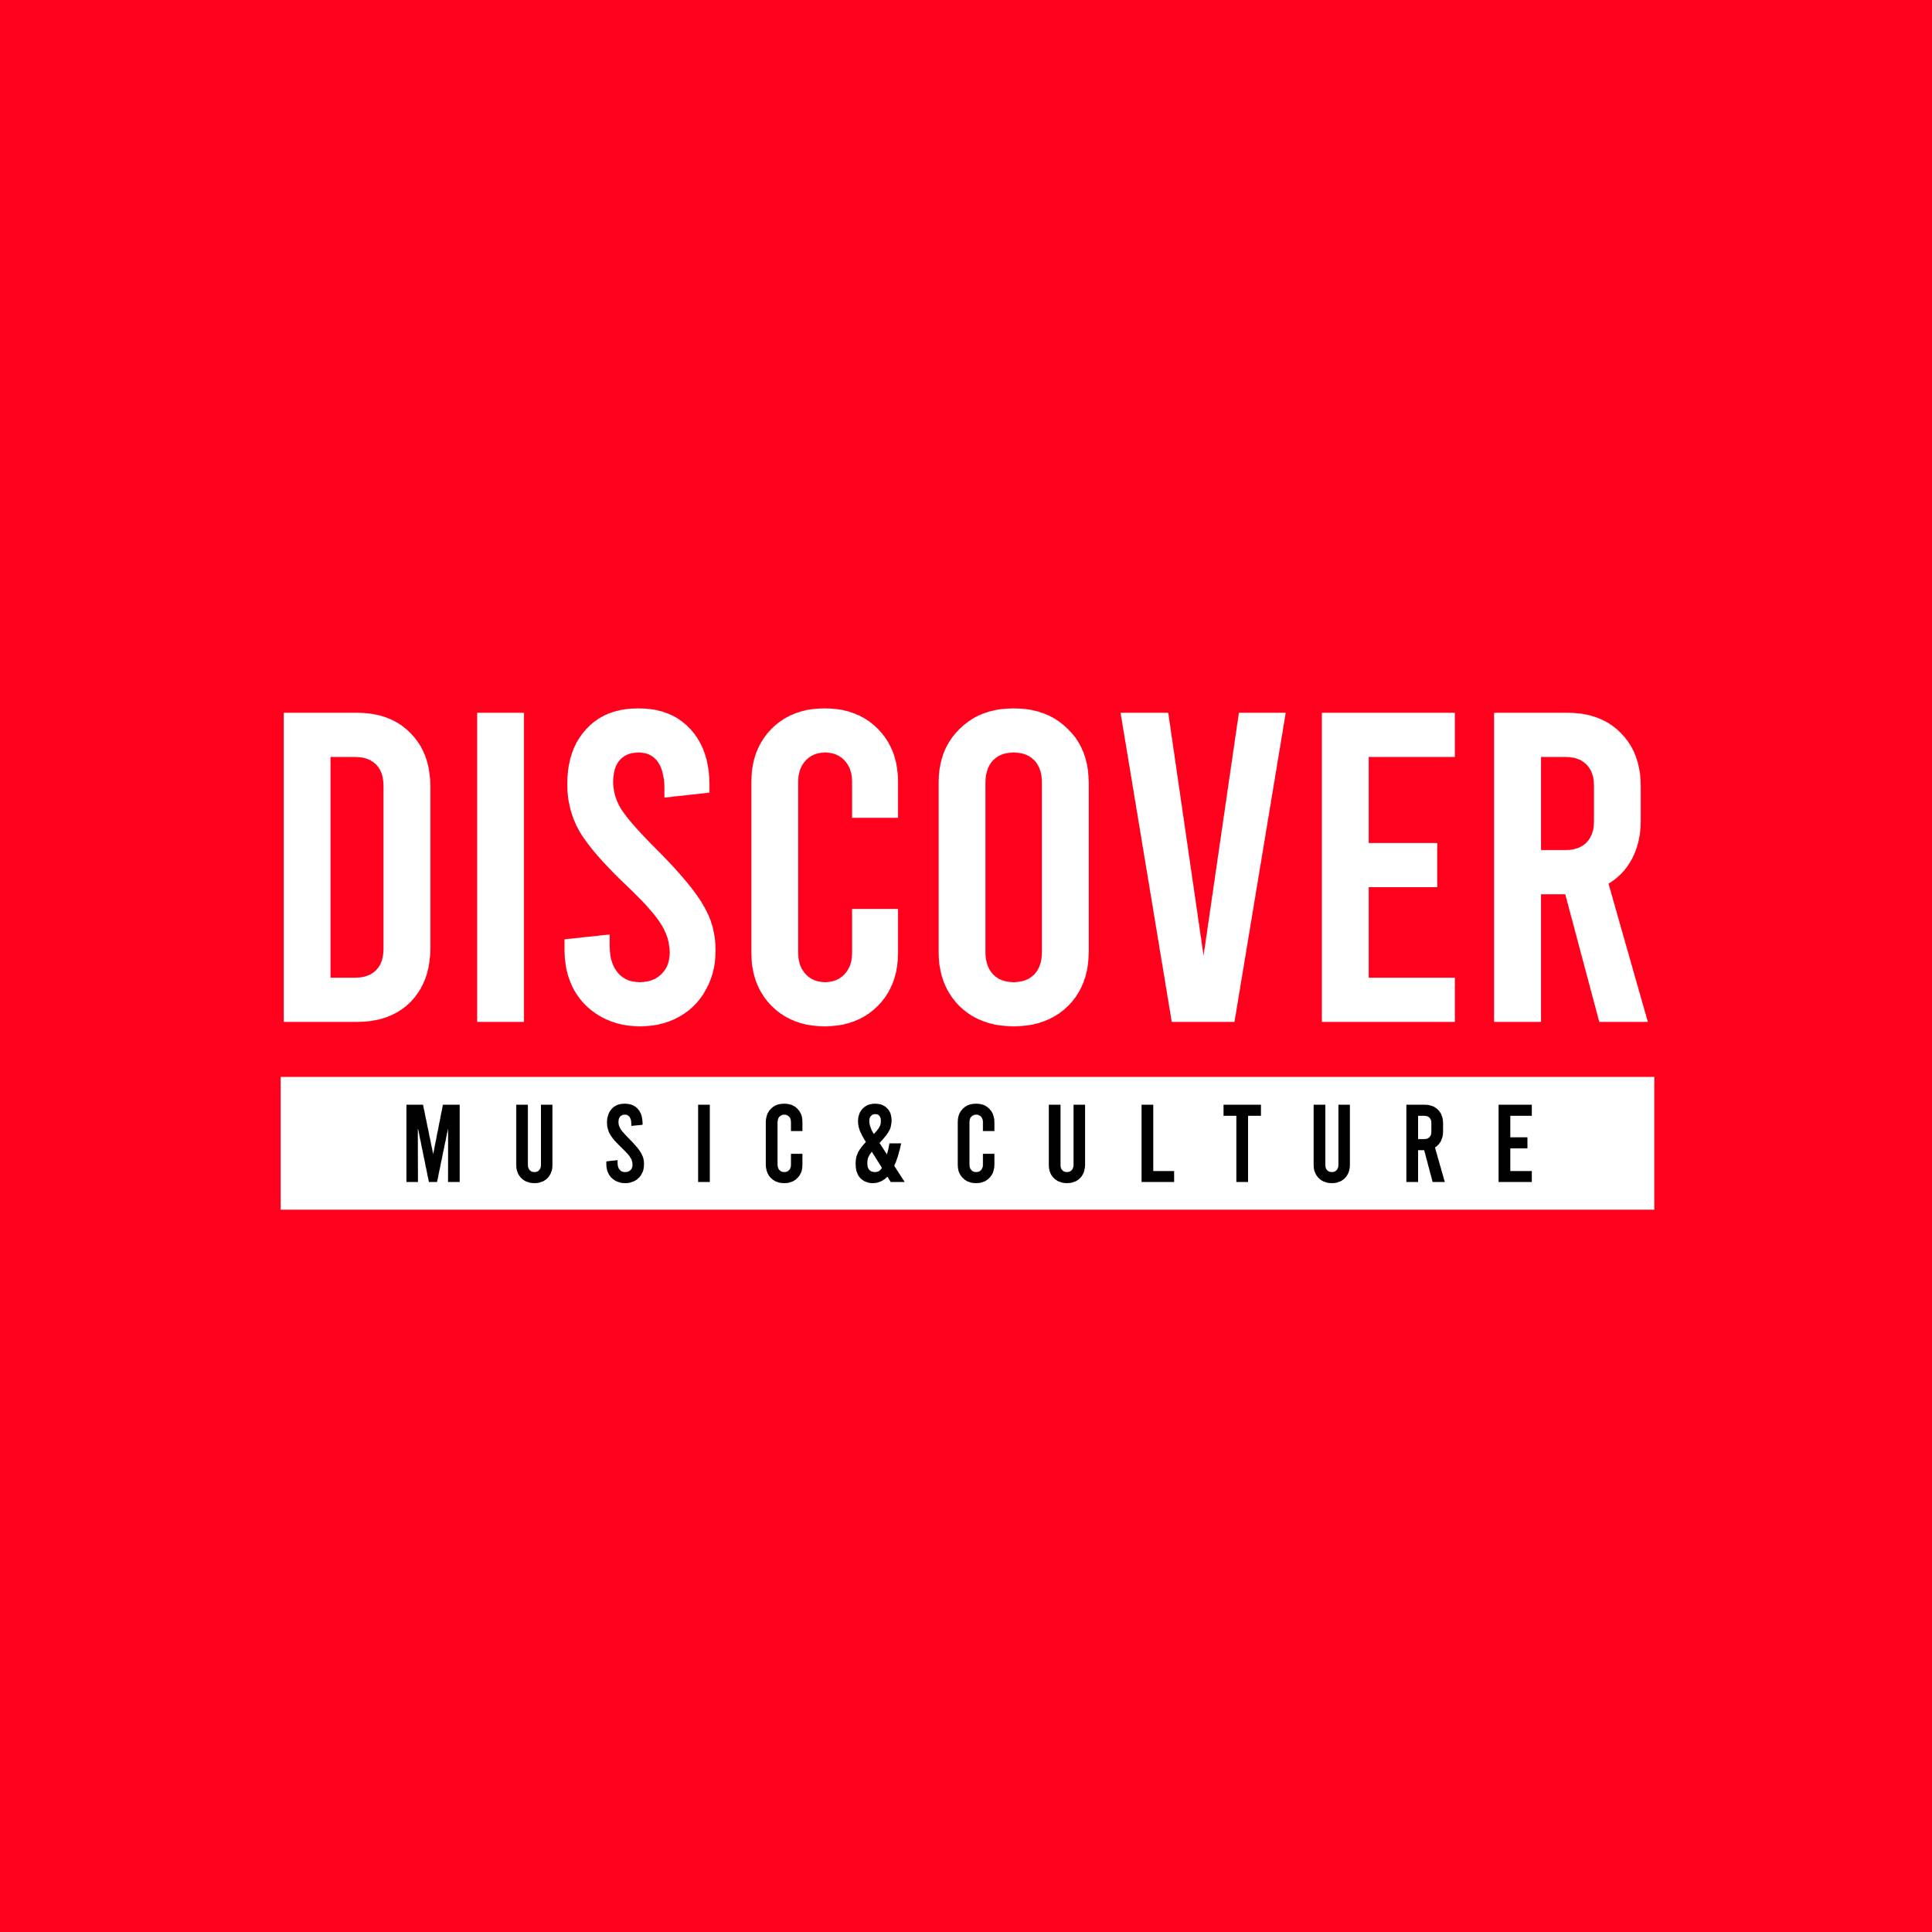 Discovering music. Discover Music.